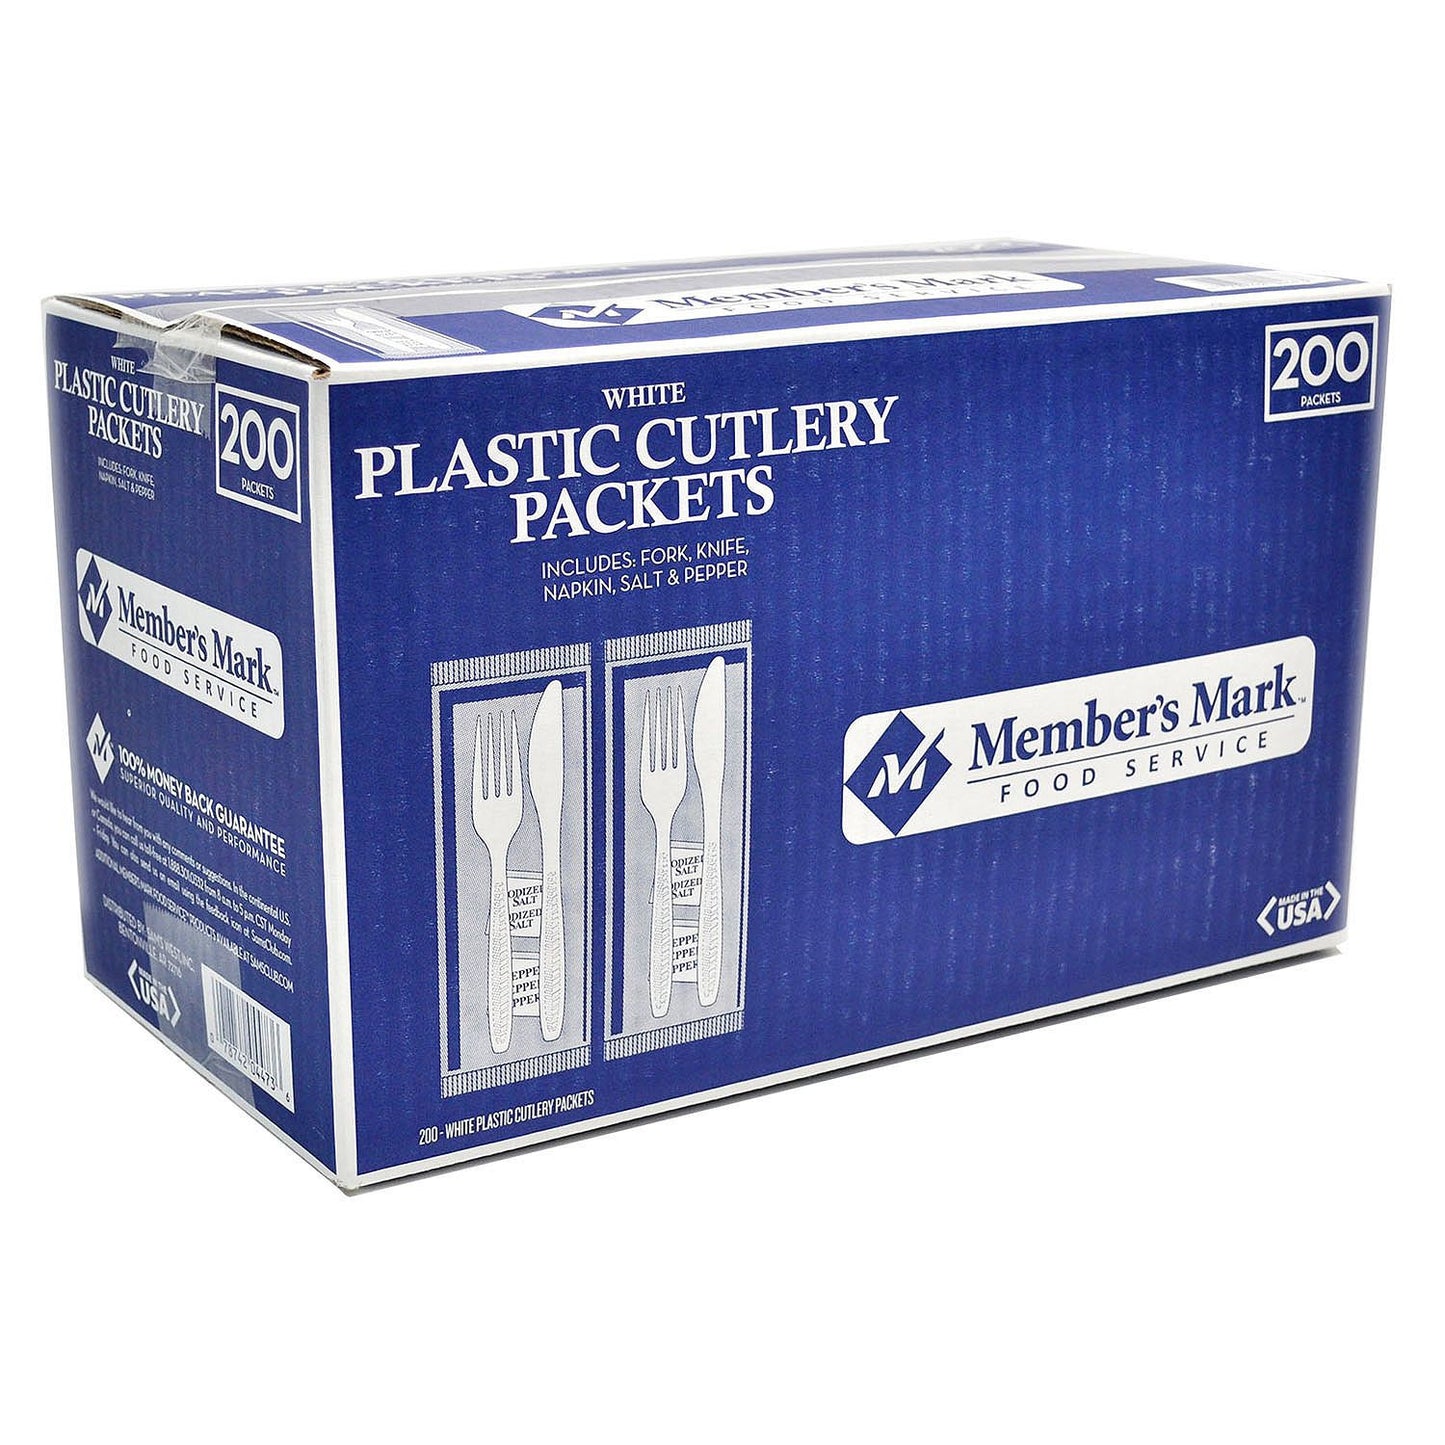 White Plastic Cutlery Packets (200 ct.)